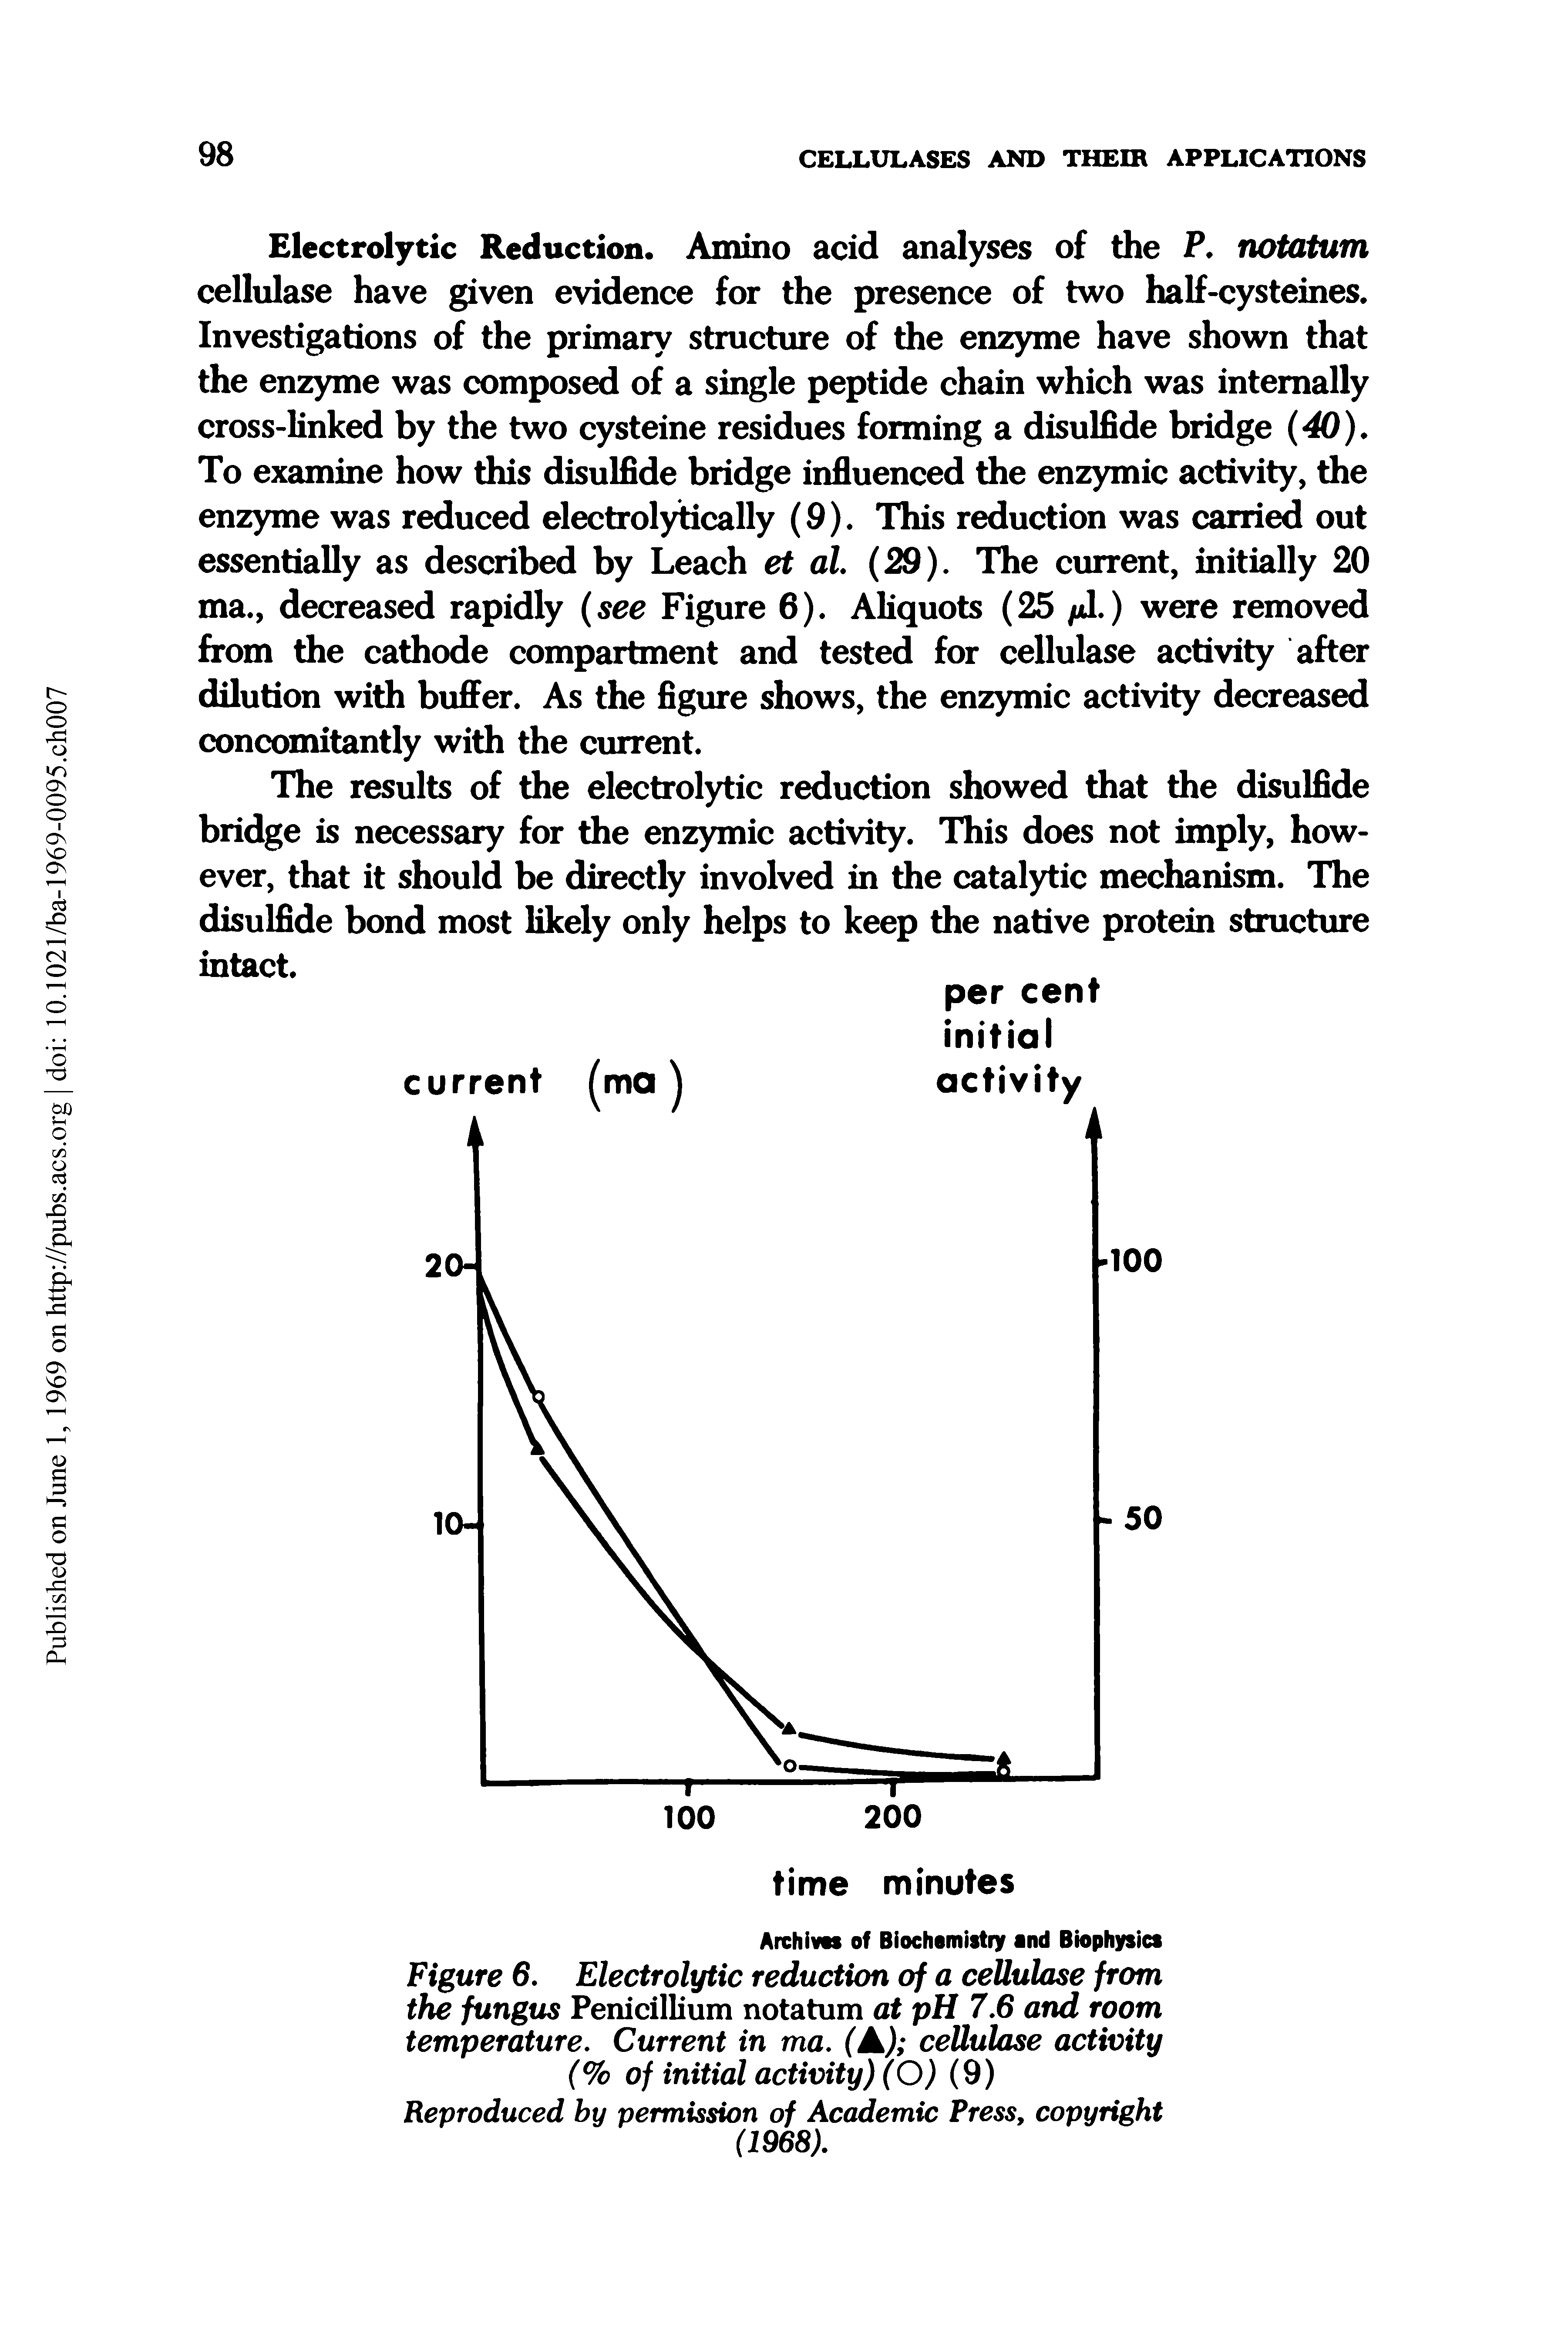 Figure 6. Electrolytic reduction of a cellulose from the fungus Penicillium notatum at pH 7.6 and room temperature. Current in ma. (A) cellulose activity (% of initial activity) (O) (9)...